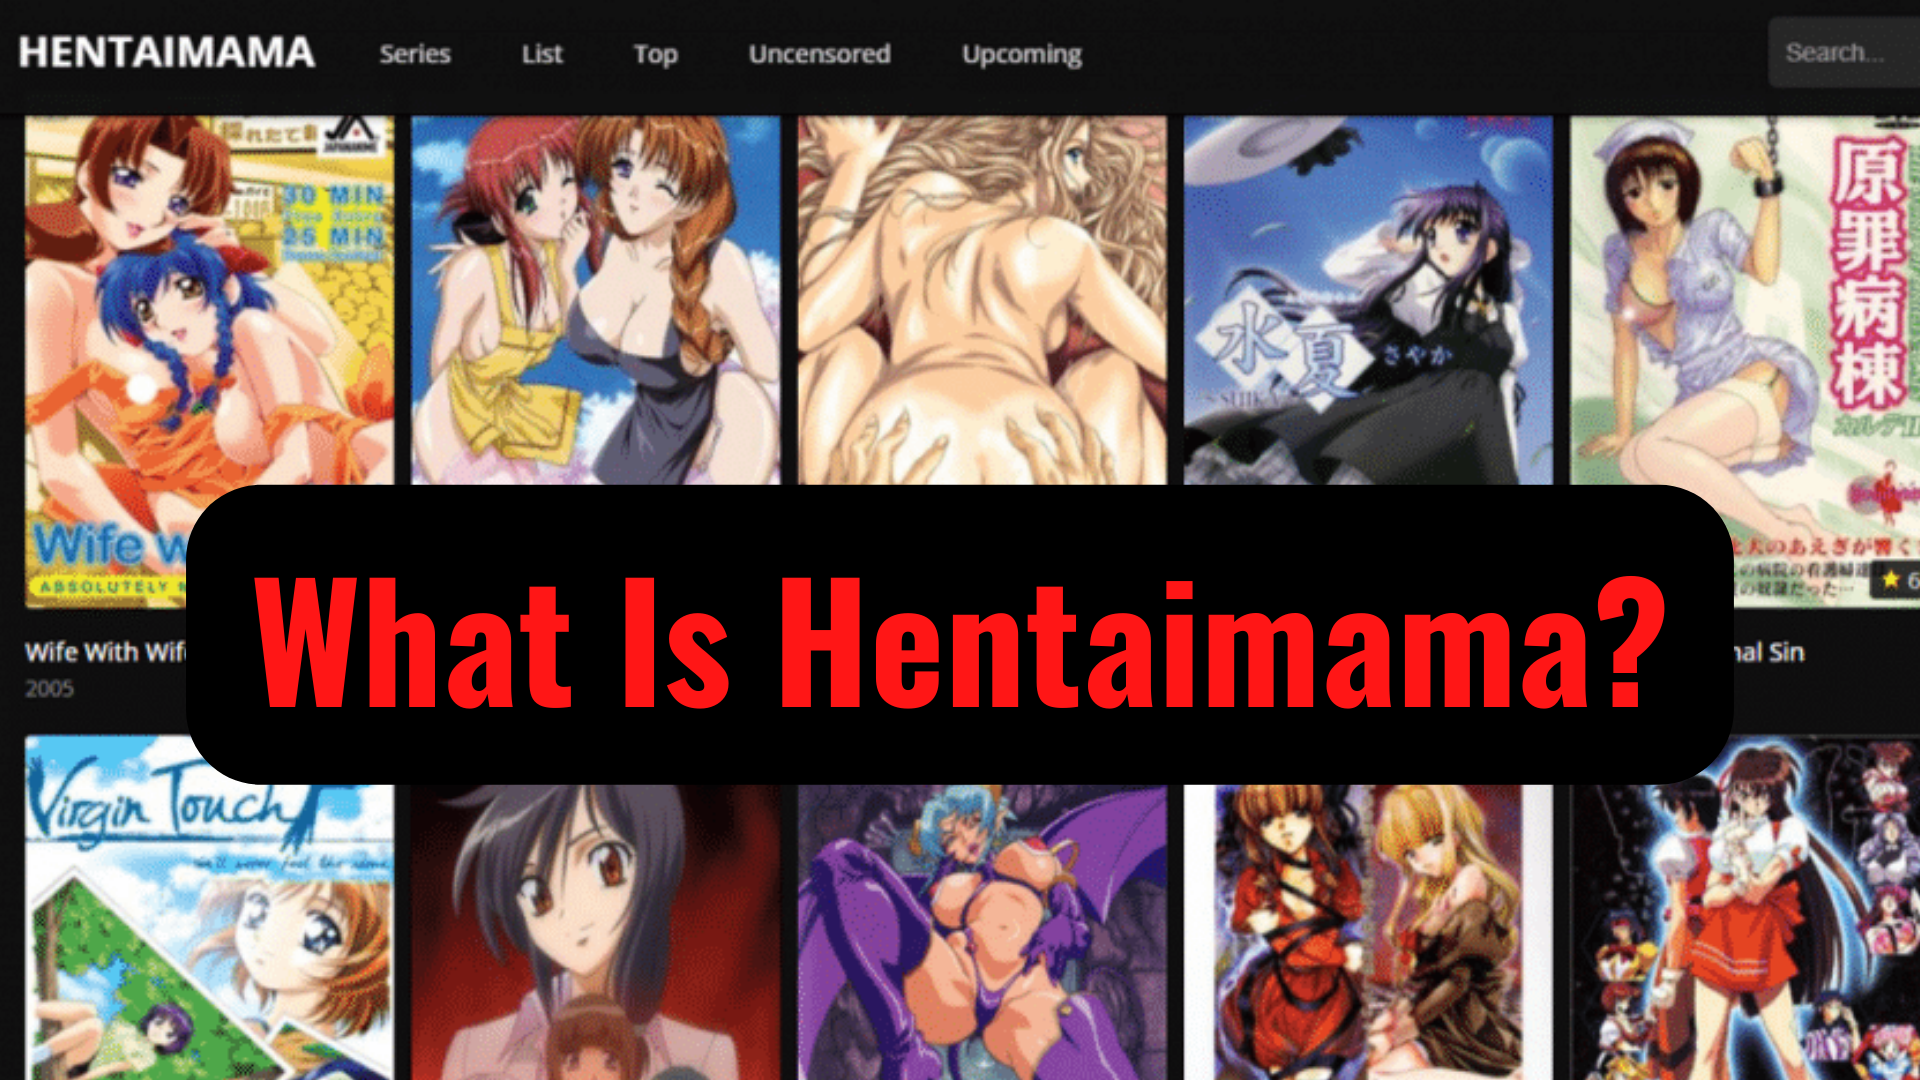 Hentaimama webpage with different anime porn covers and words What Is Hentaimama?